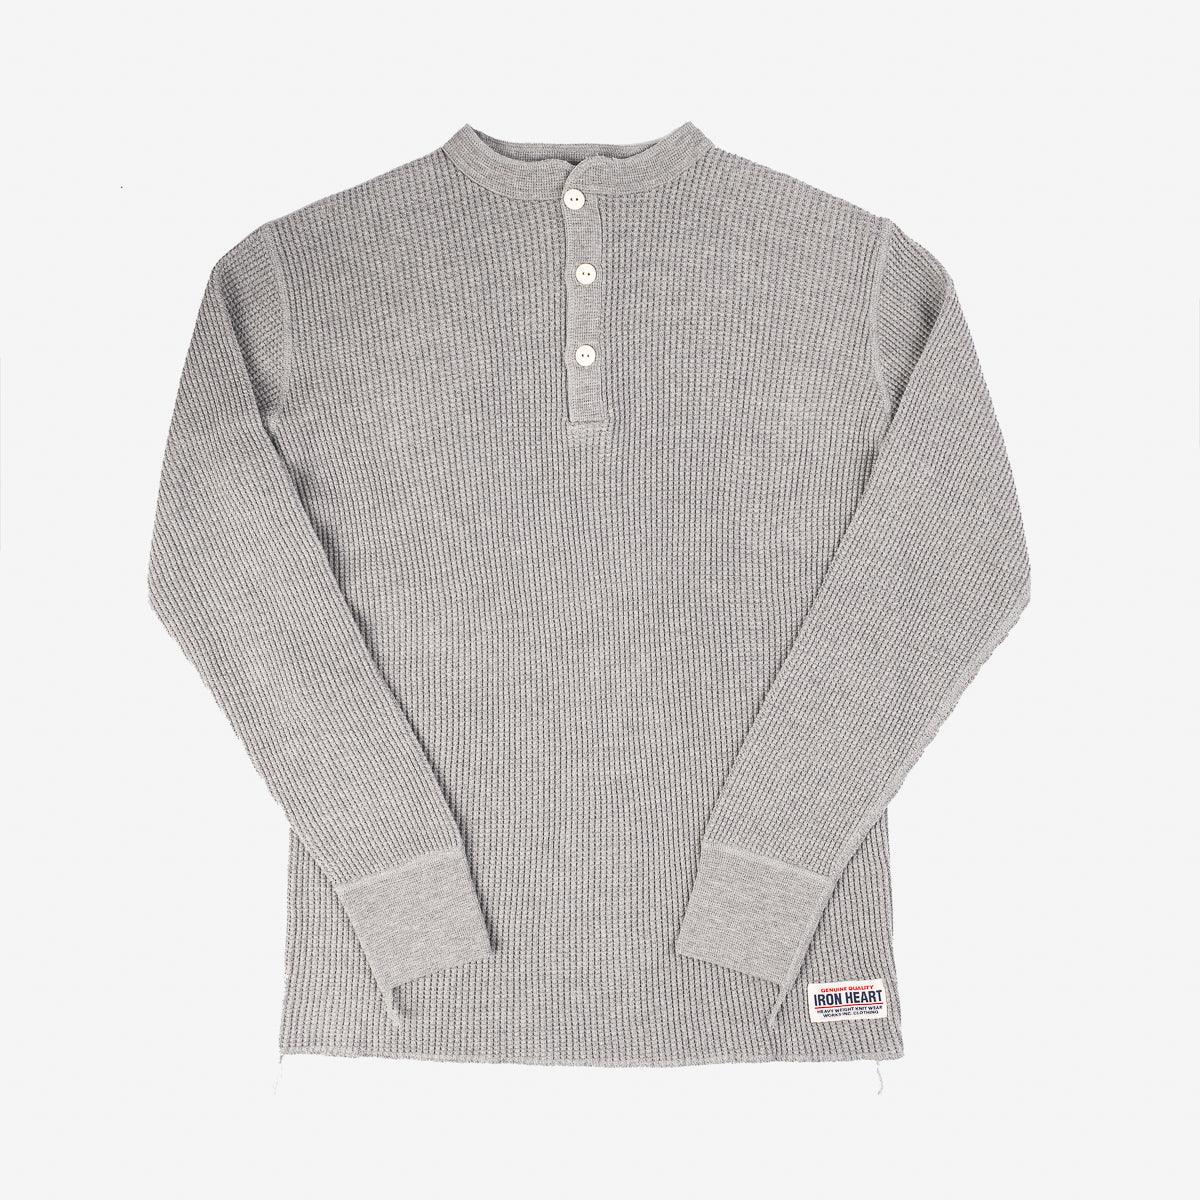 Image showing the IHTL-1213-GRY - Waffle Knit Long Sleeved Thermal Henley Grey which is a T-Shirts described by the following info Back In, Iron Heart, Released, T-Shirts, Tops and sold on the IRON HEART GERMANY online store